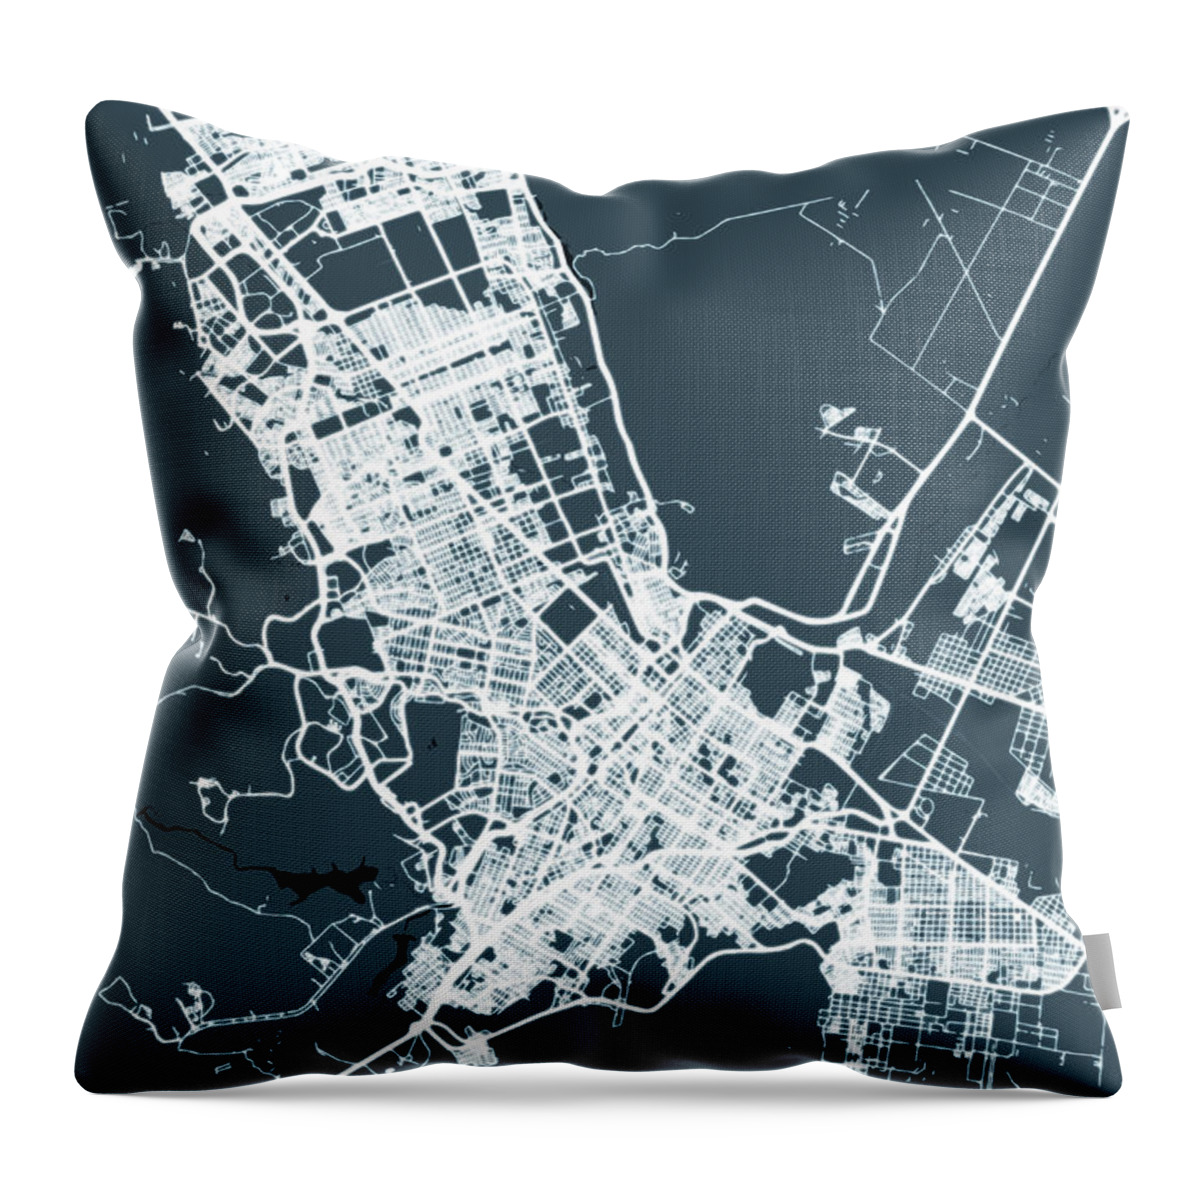 City Throw Pillow featuring the digital art Chihuahua Mexico by Bo Kev